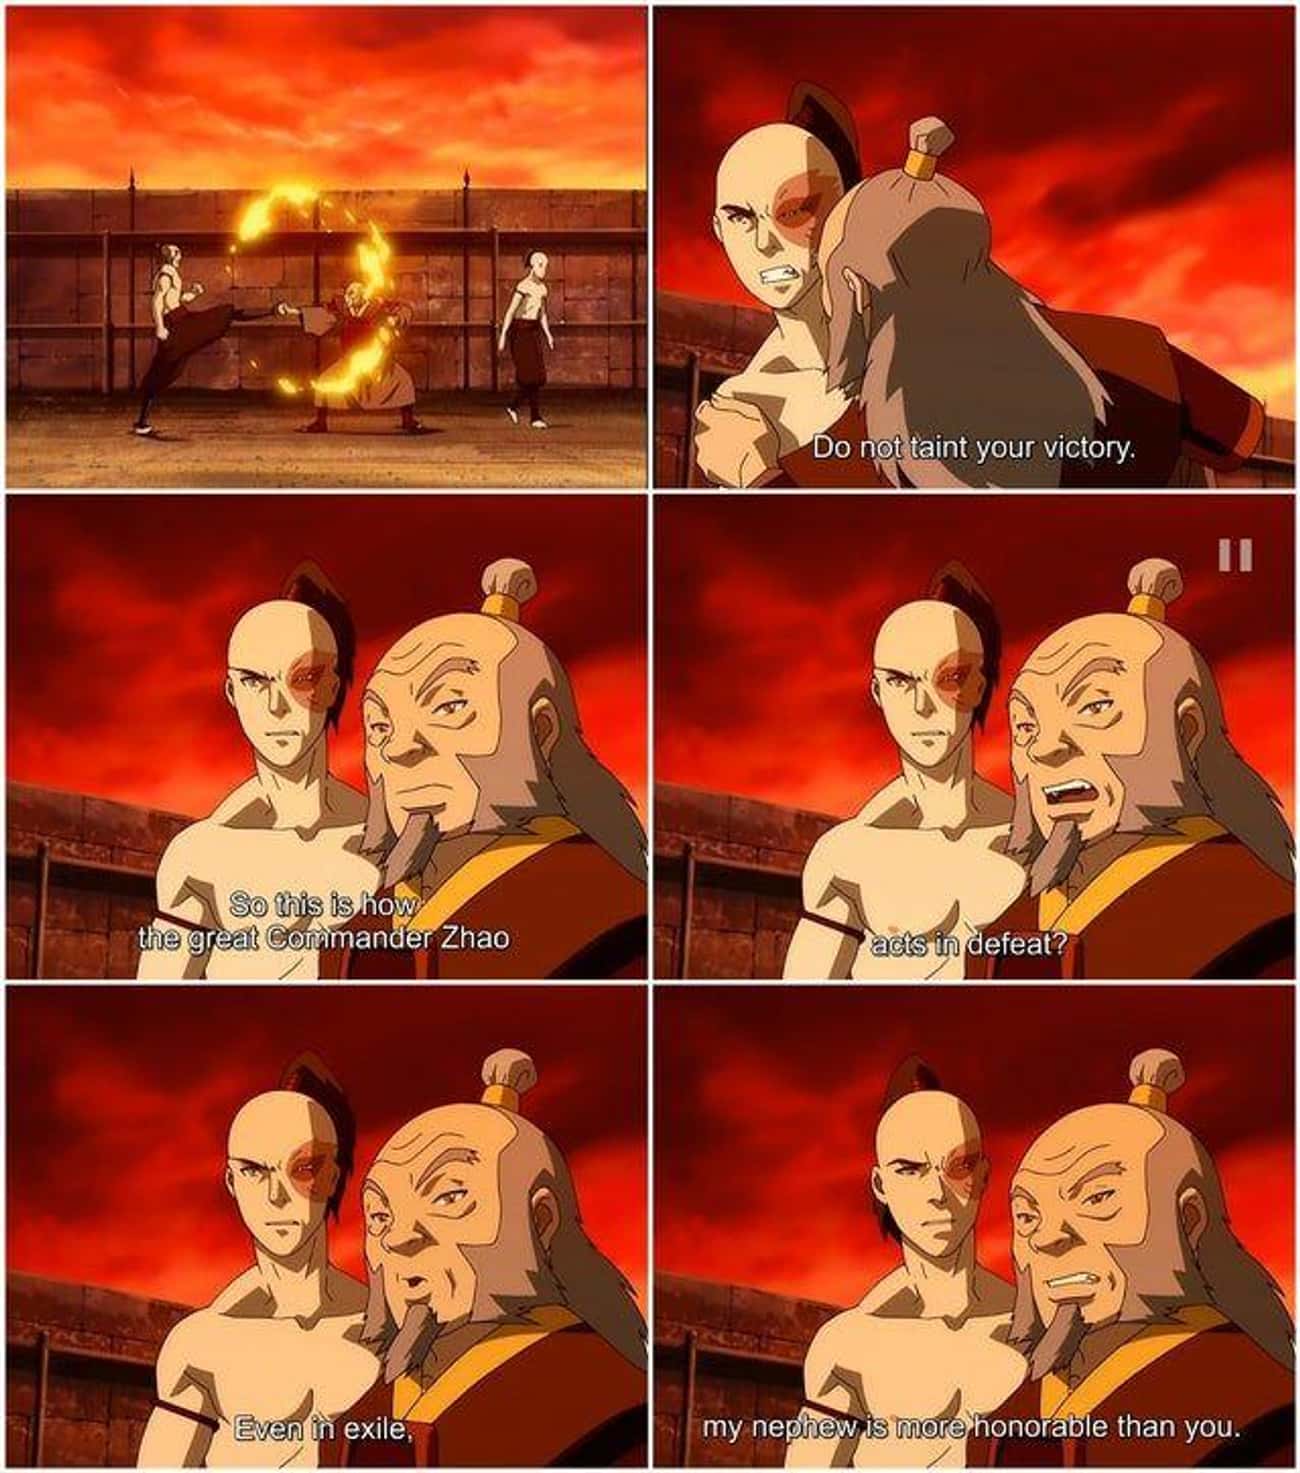 Iroh Acts With True Honor